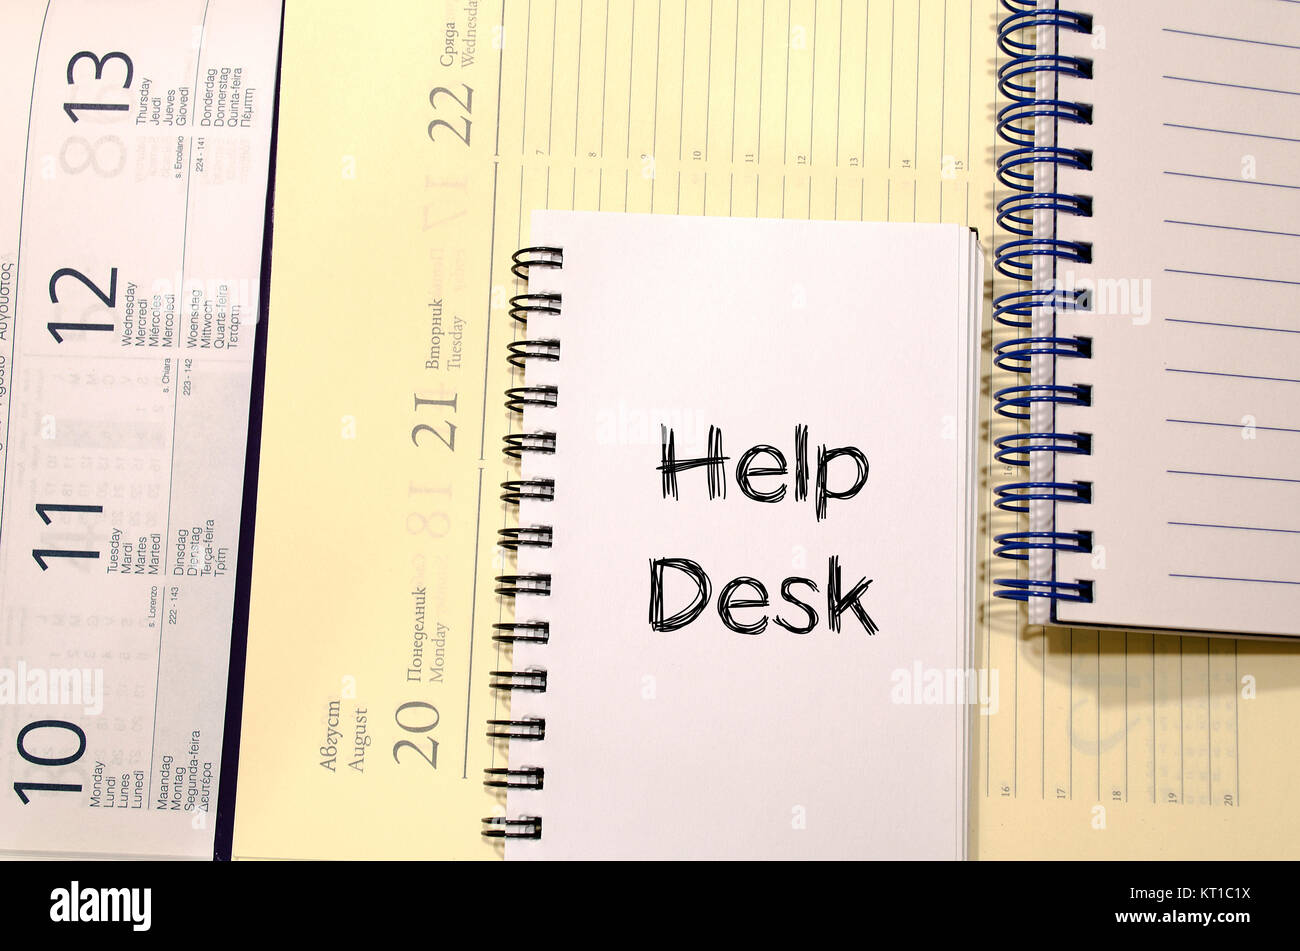 Help desk concept on notebook Stock Photo